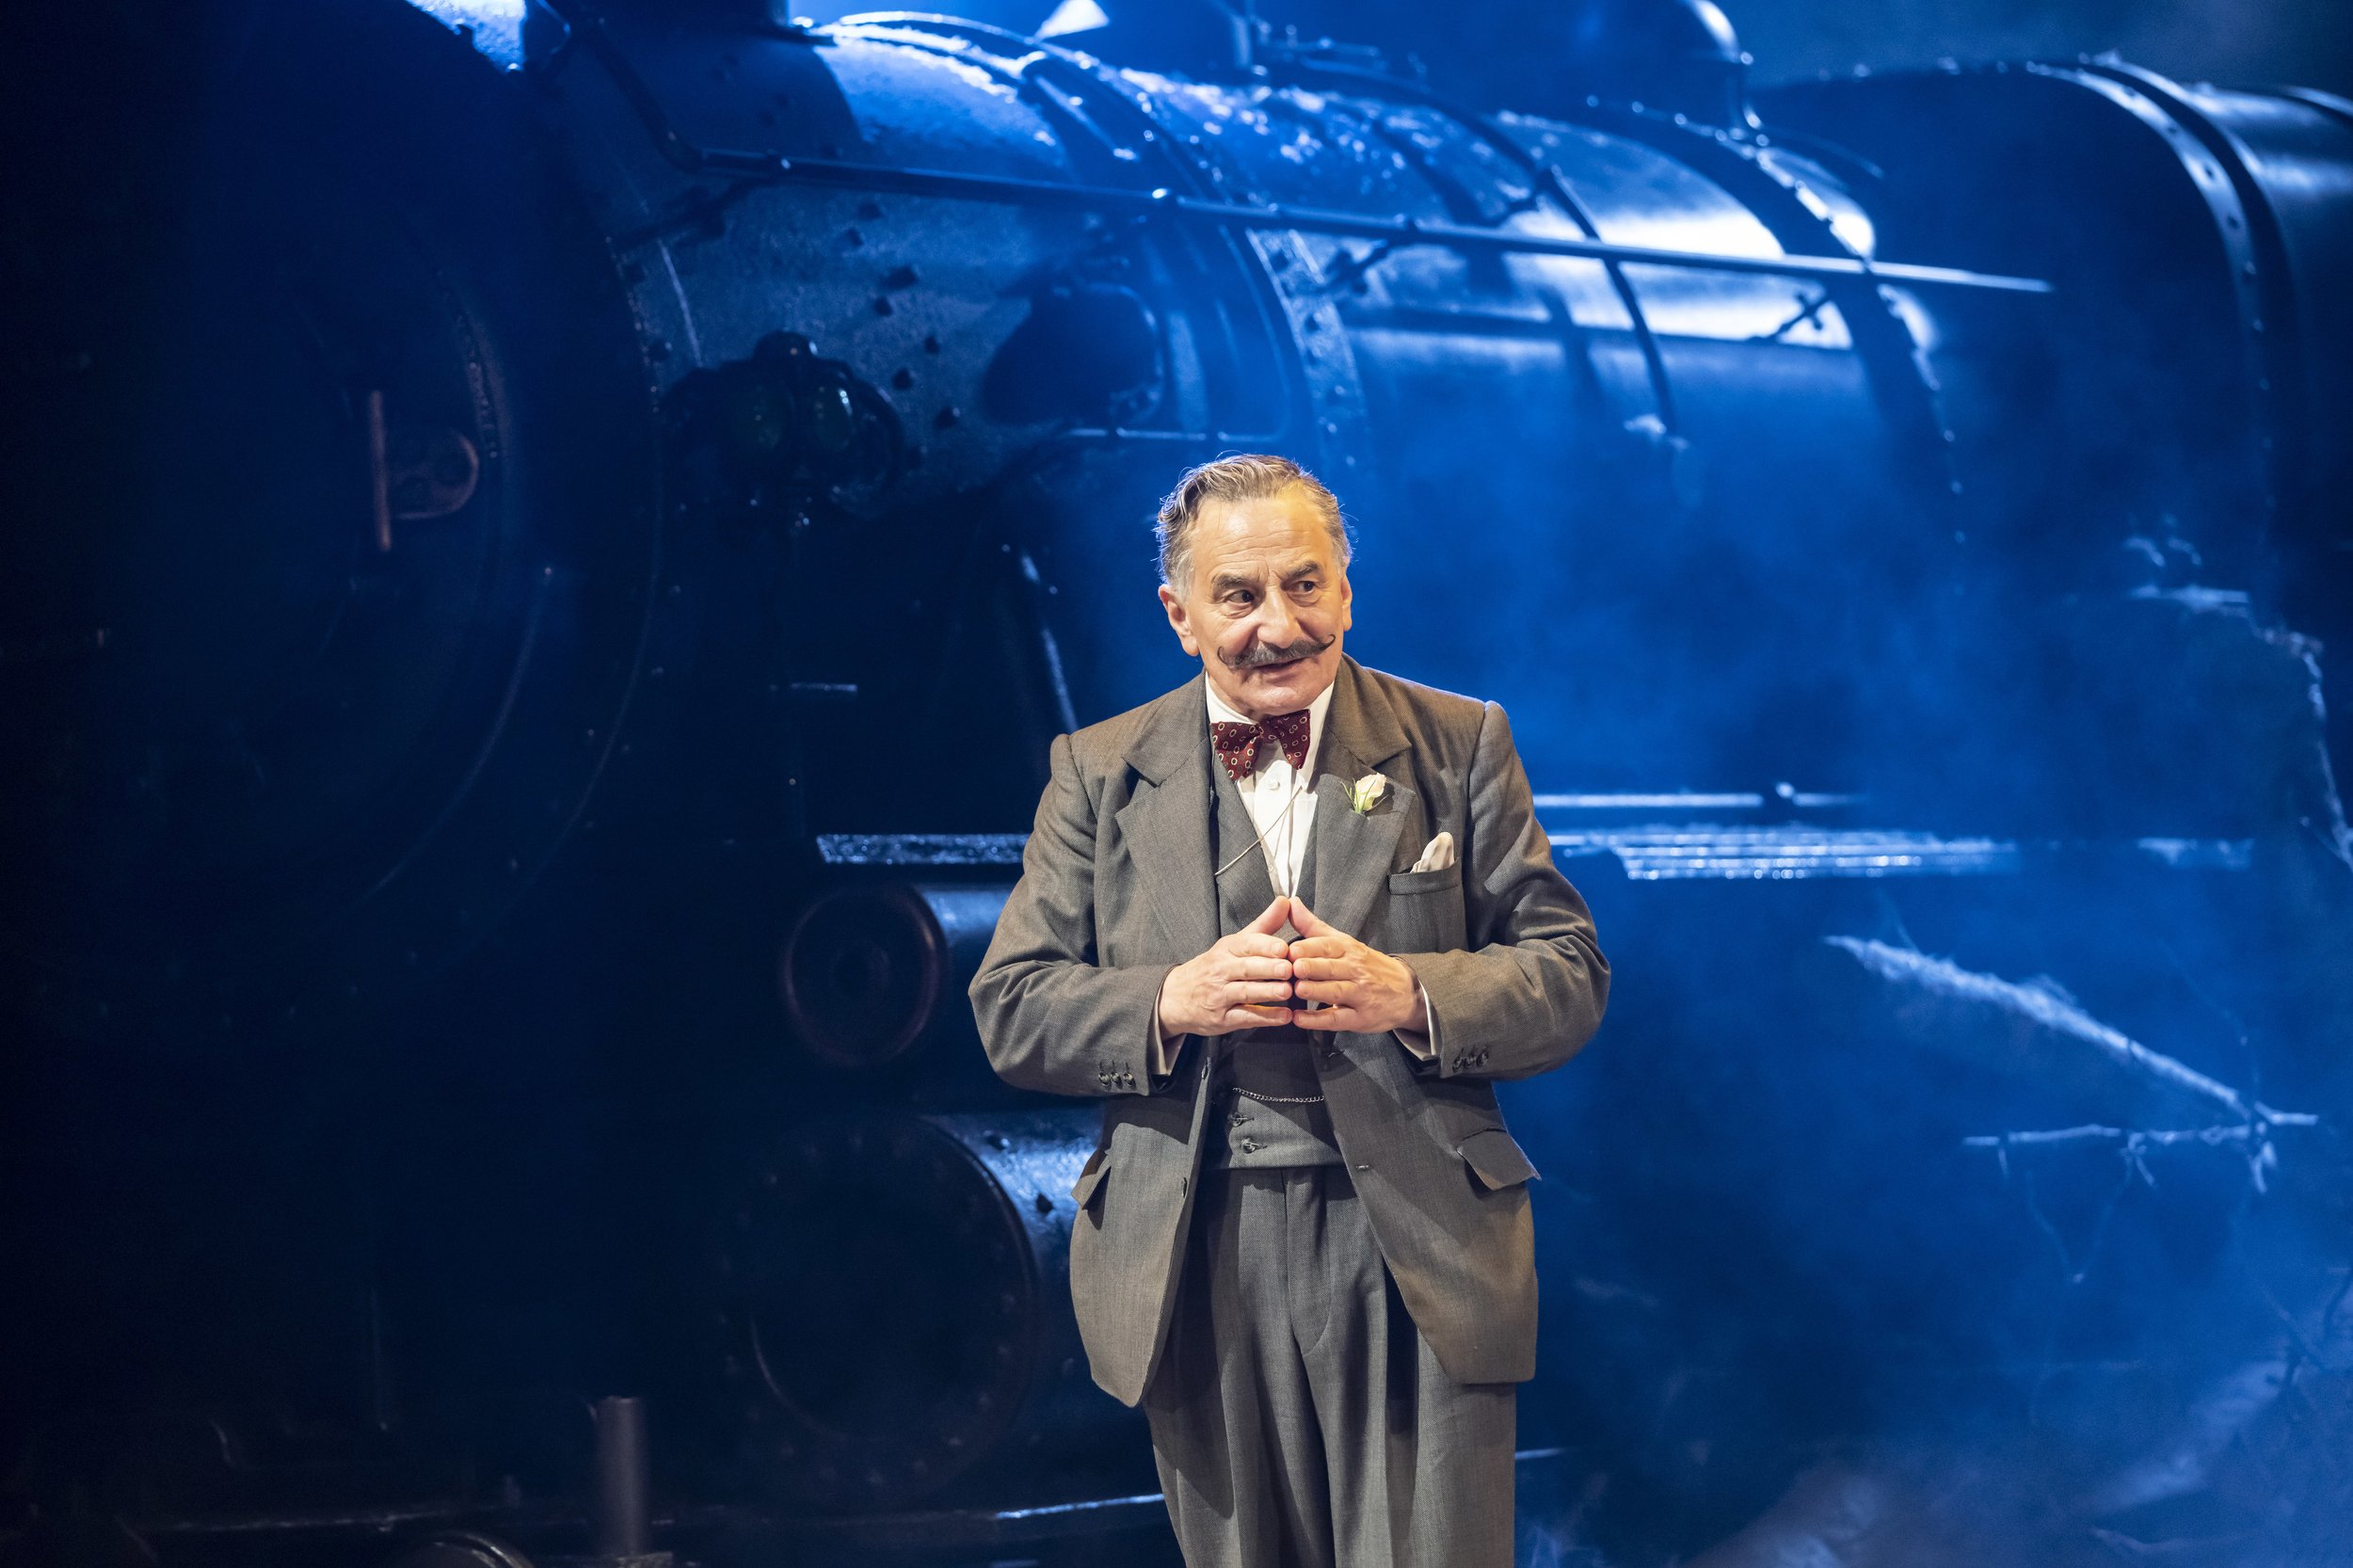 Henry Goodman as Hercule Poirot in Murder on the Orient Express at Chichester Festival Theatre